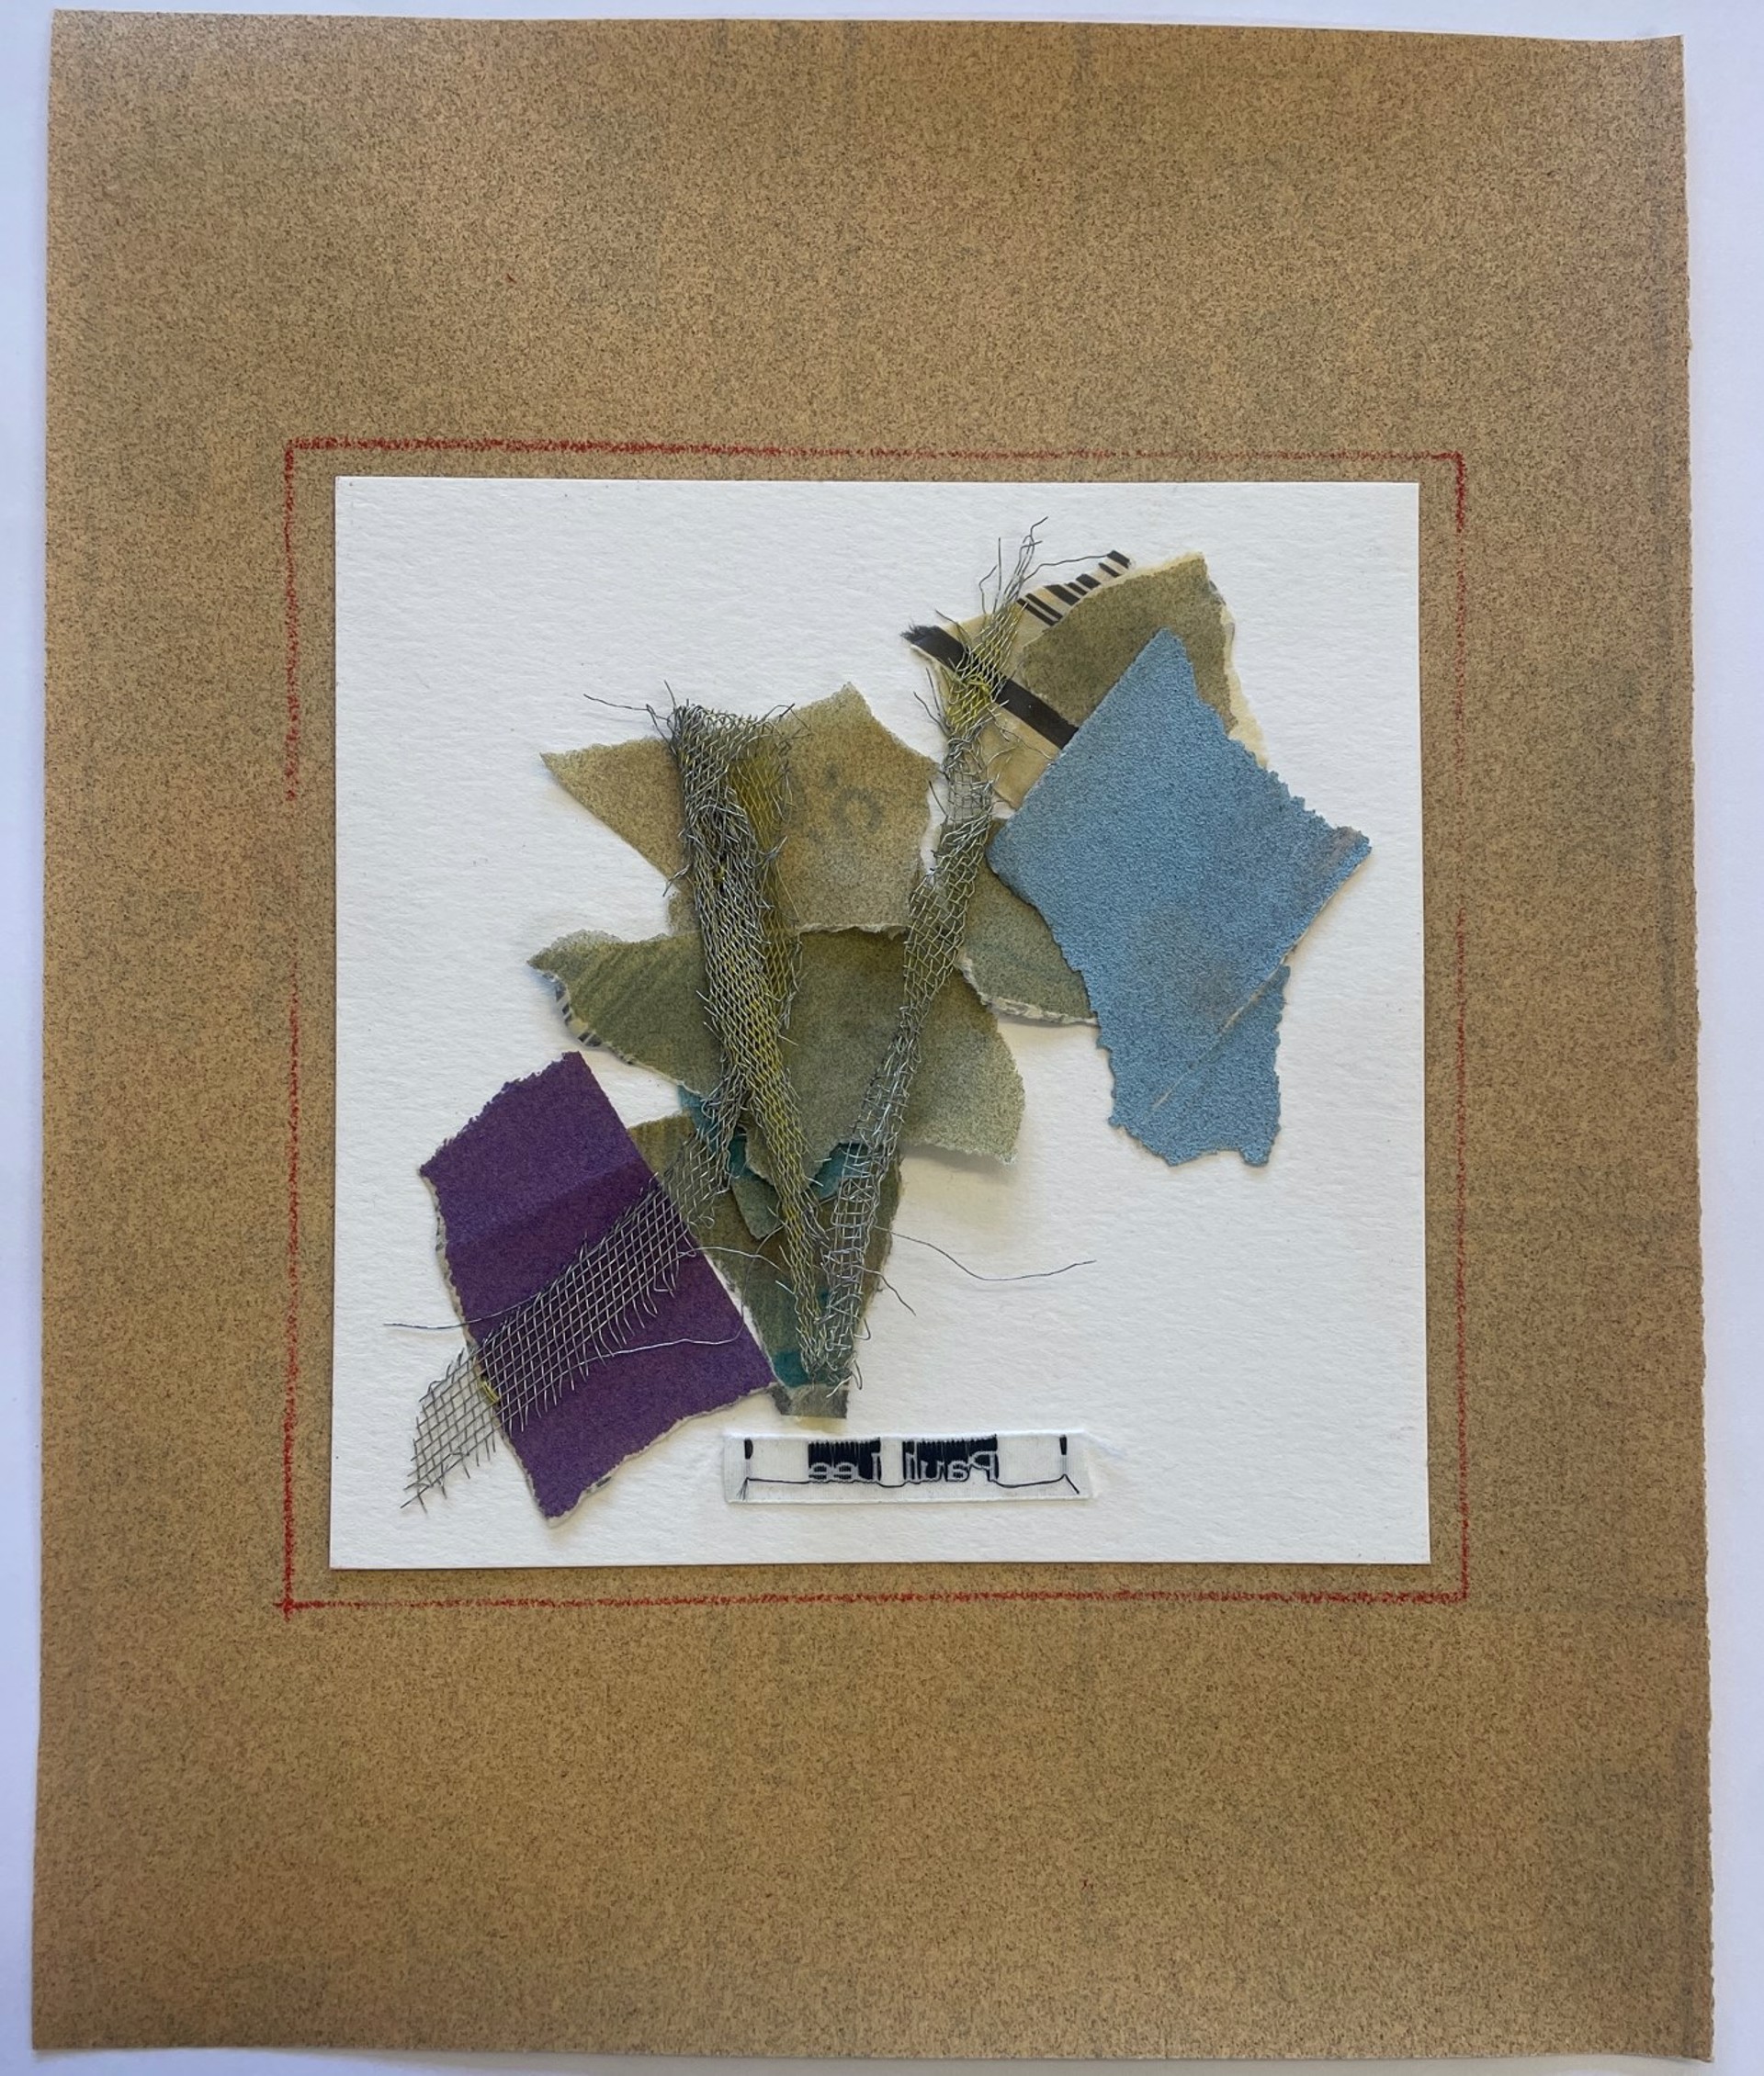 Sandpaper Collage No. 3 by Paul Lee